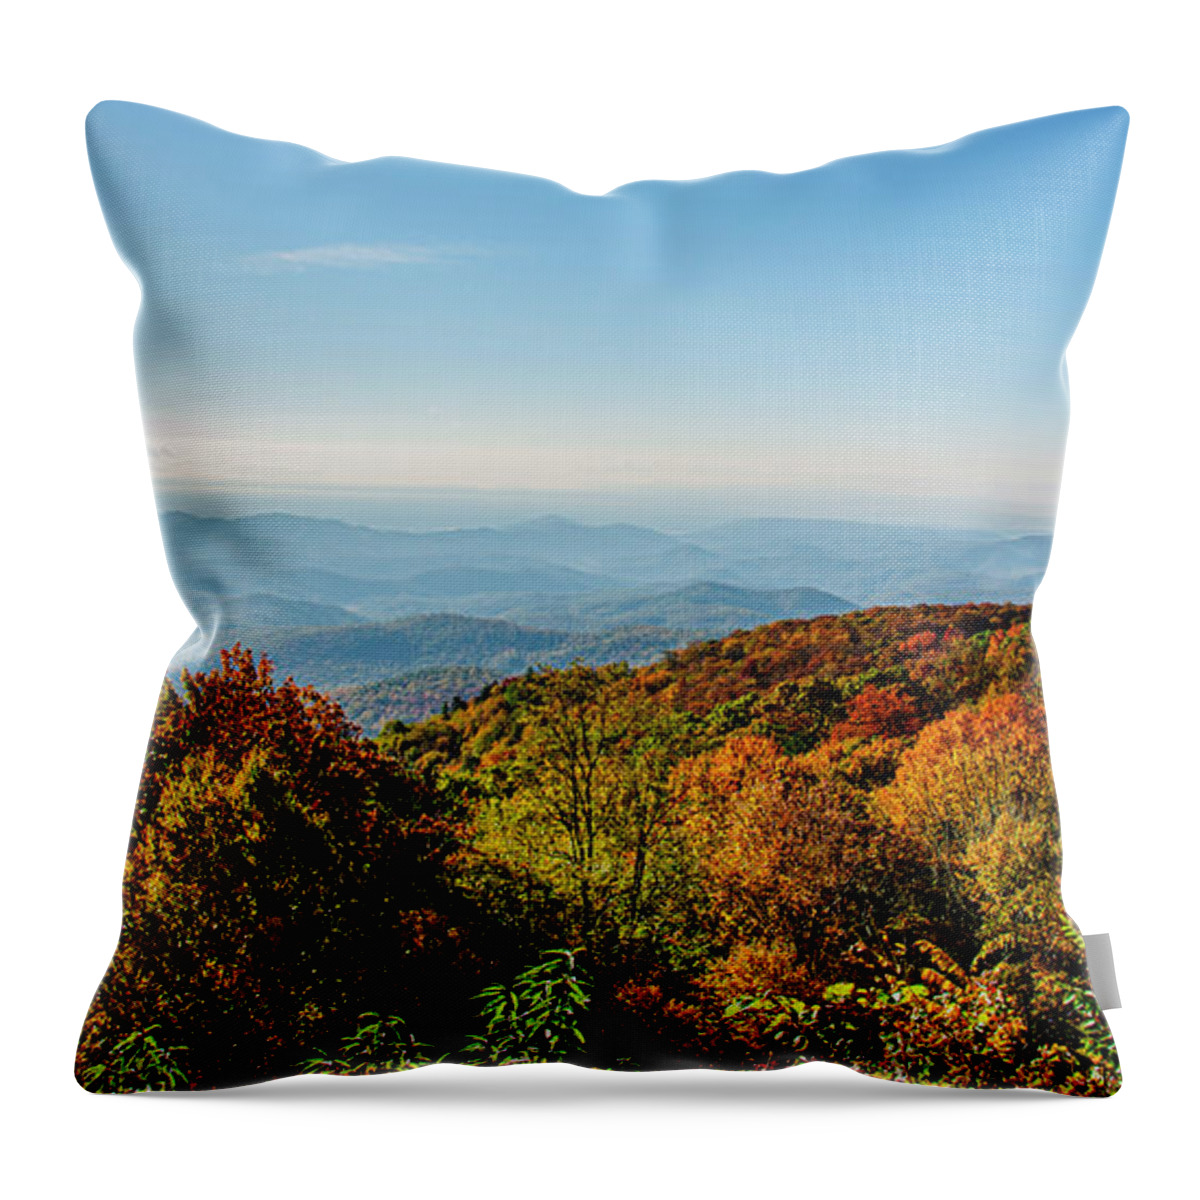 Autumn Throw Pillow featuring the photograph Autumn Blue Ridge Parkway by Jim Cook